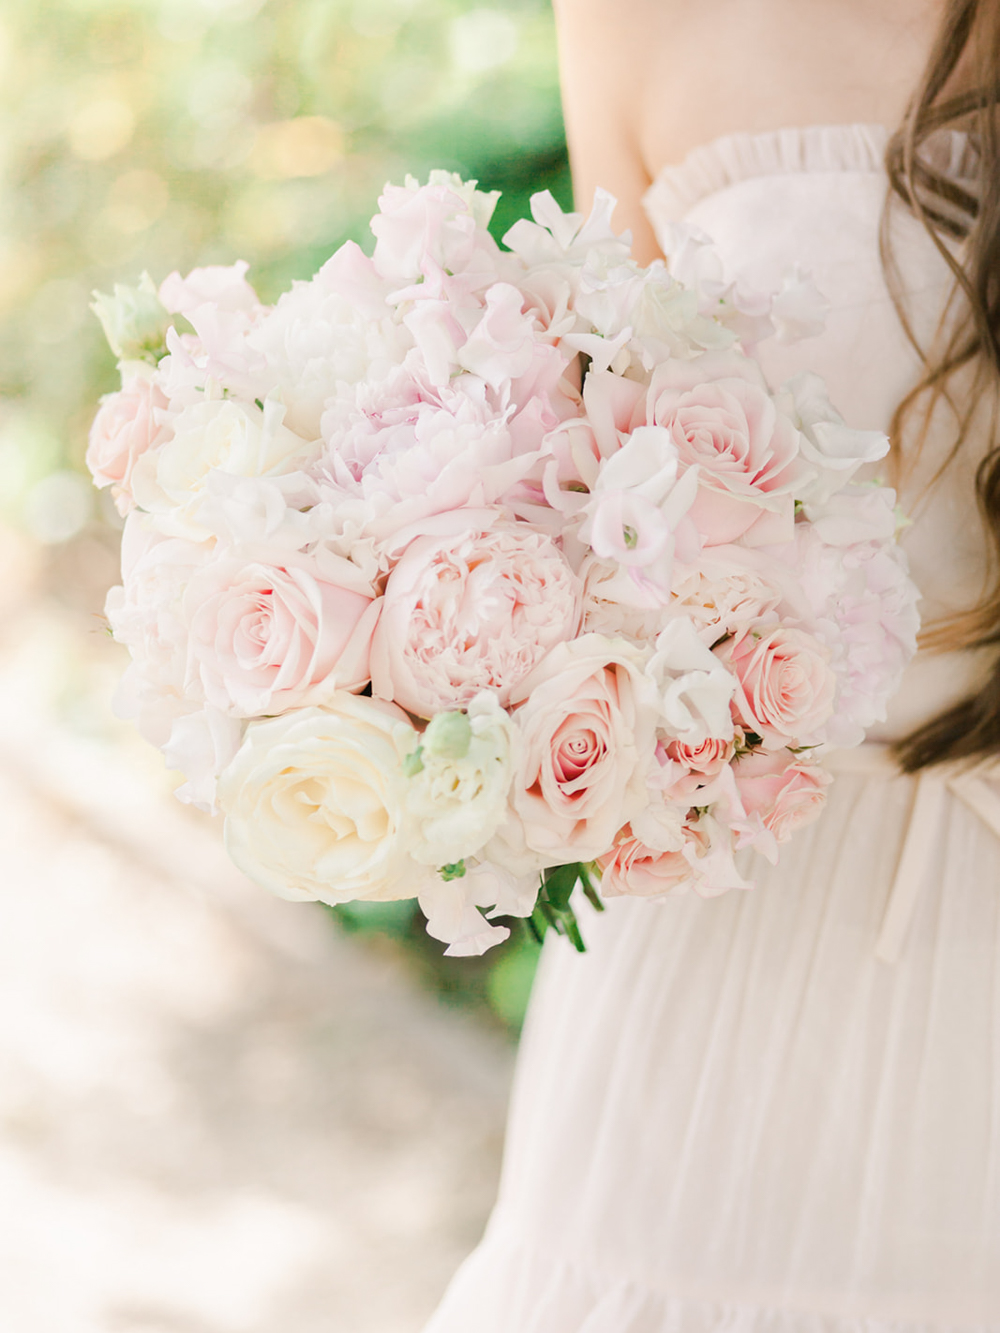 Blush and white peonies by Stephanie Saunders